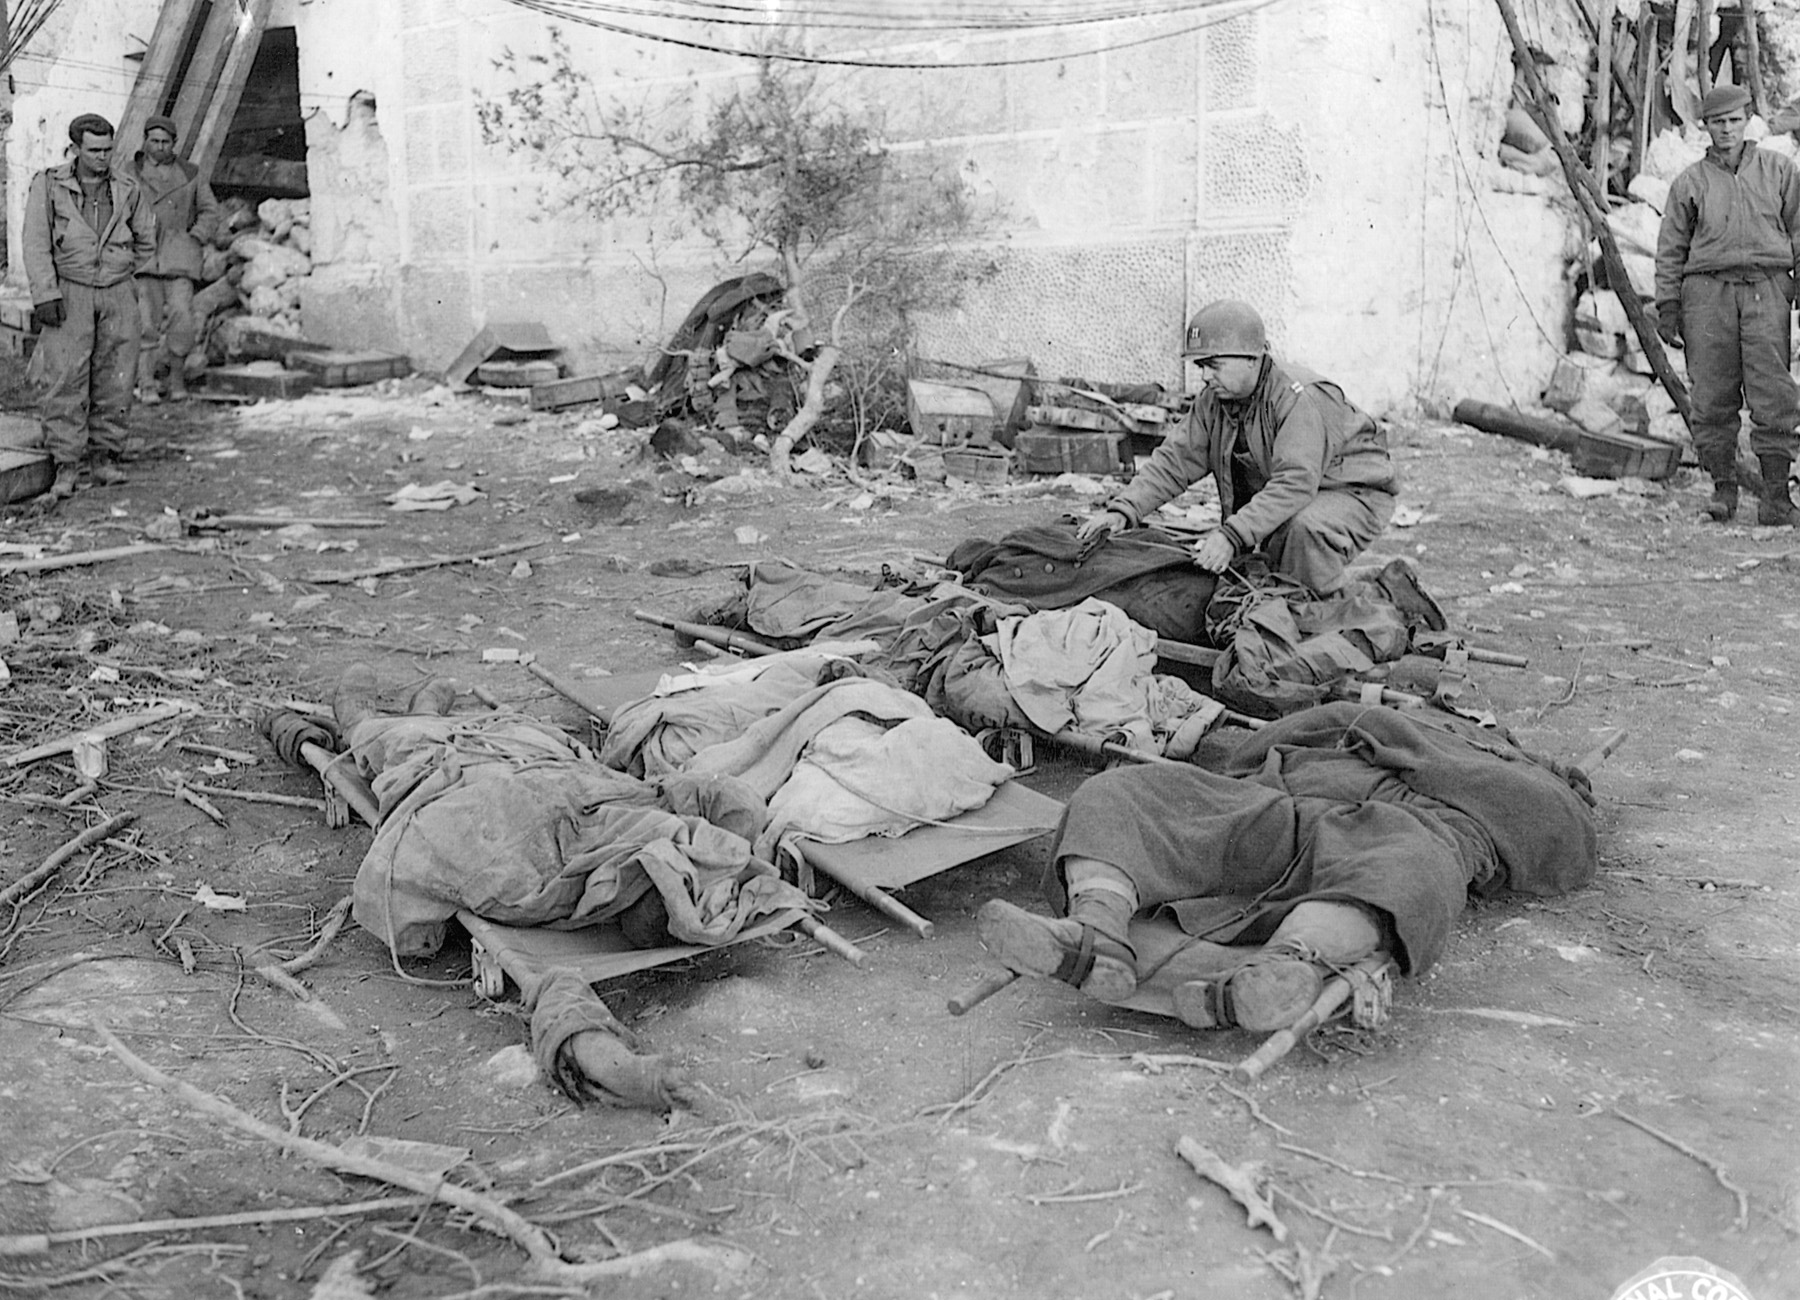 Following the bitter battle at San Pietro, 36th Division Chaplain Robert E. Alspaugh evacuates the bodies of T-patchers killed in action.